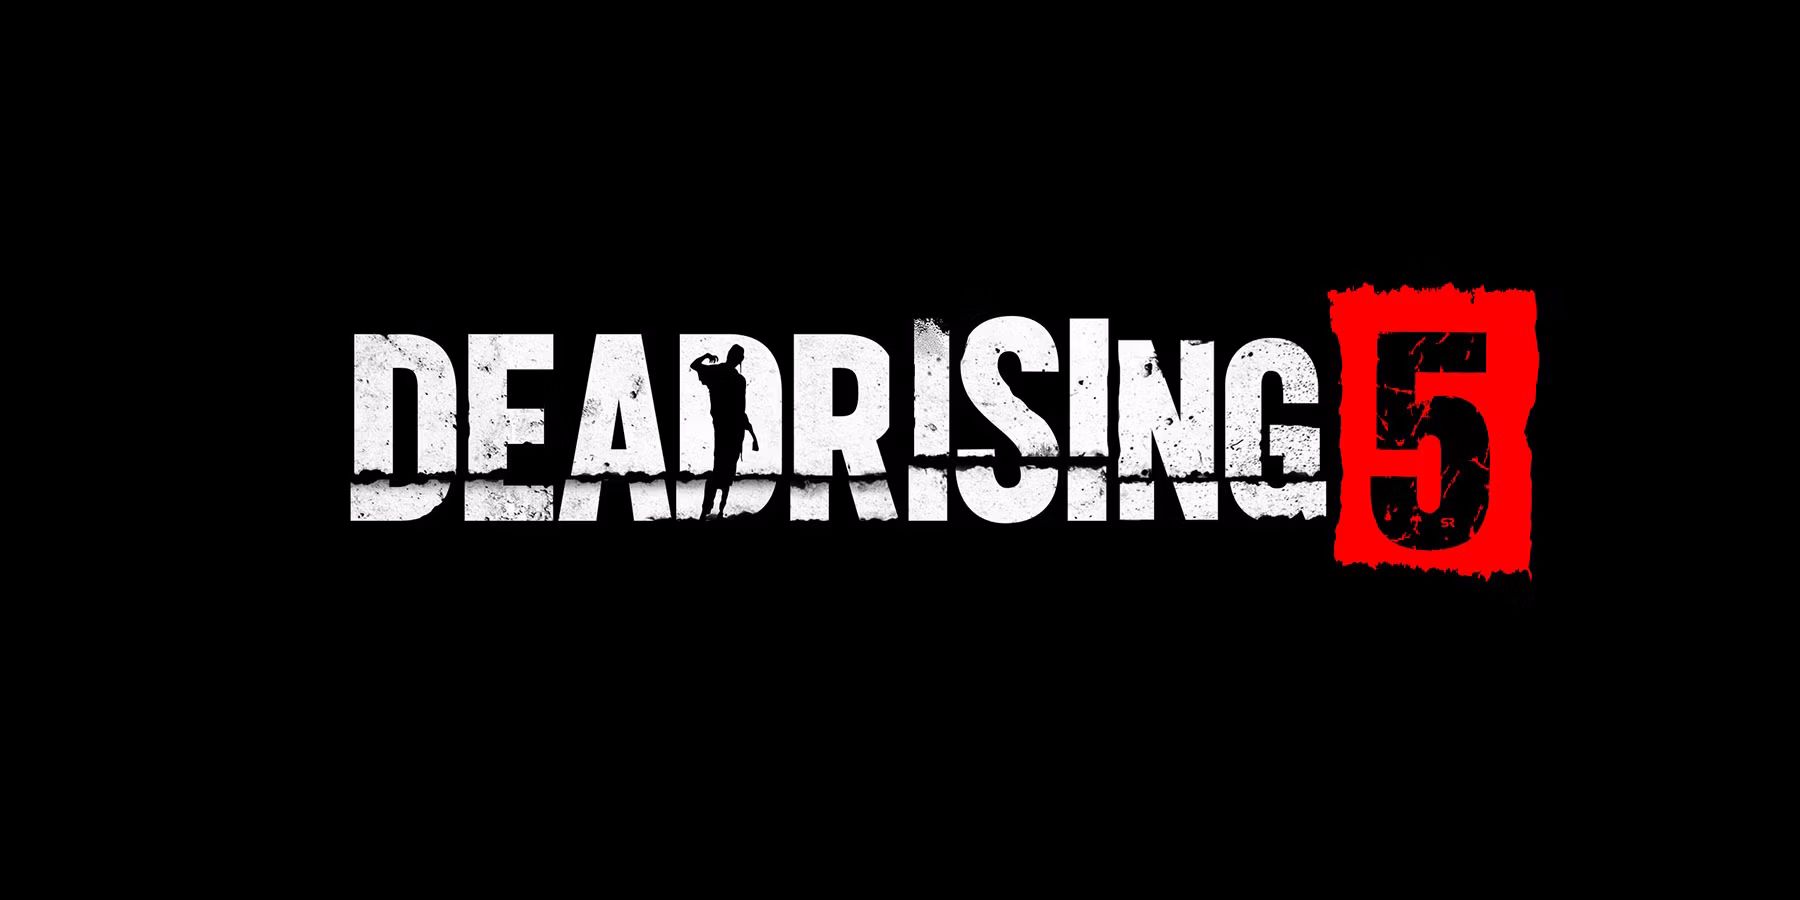 New Dead Rising teased, may be a remake of the first game